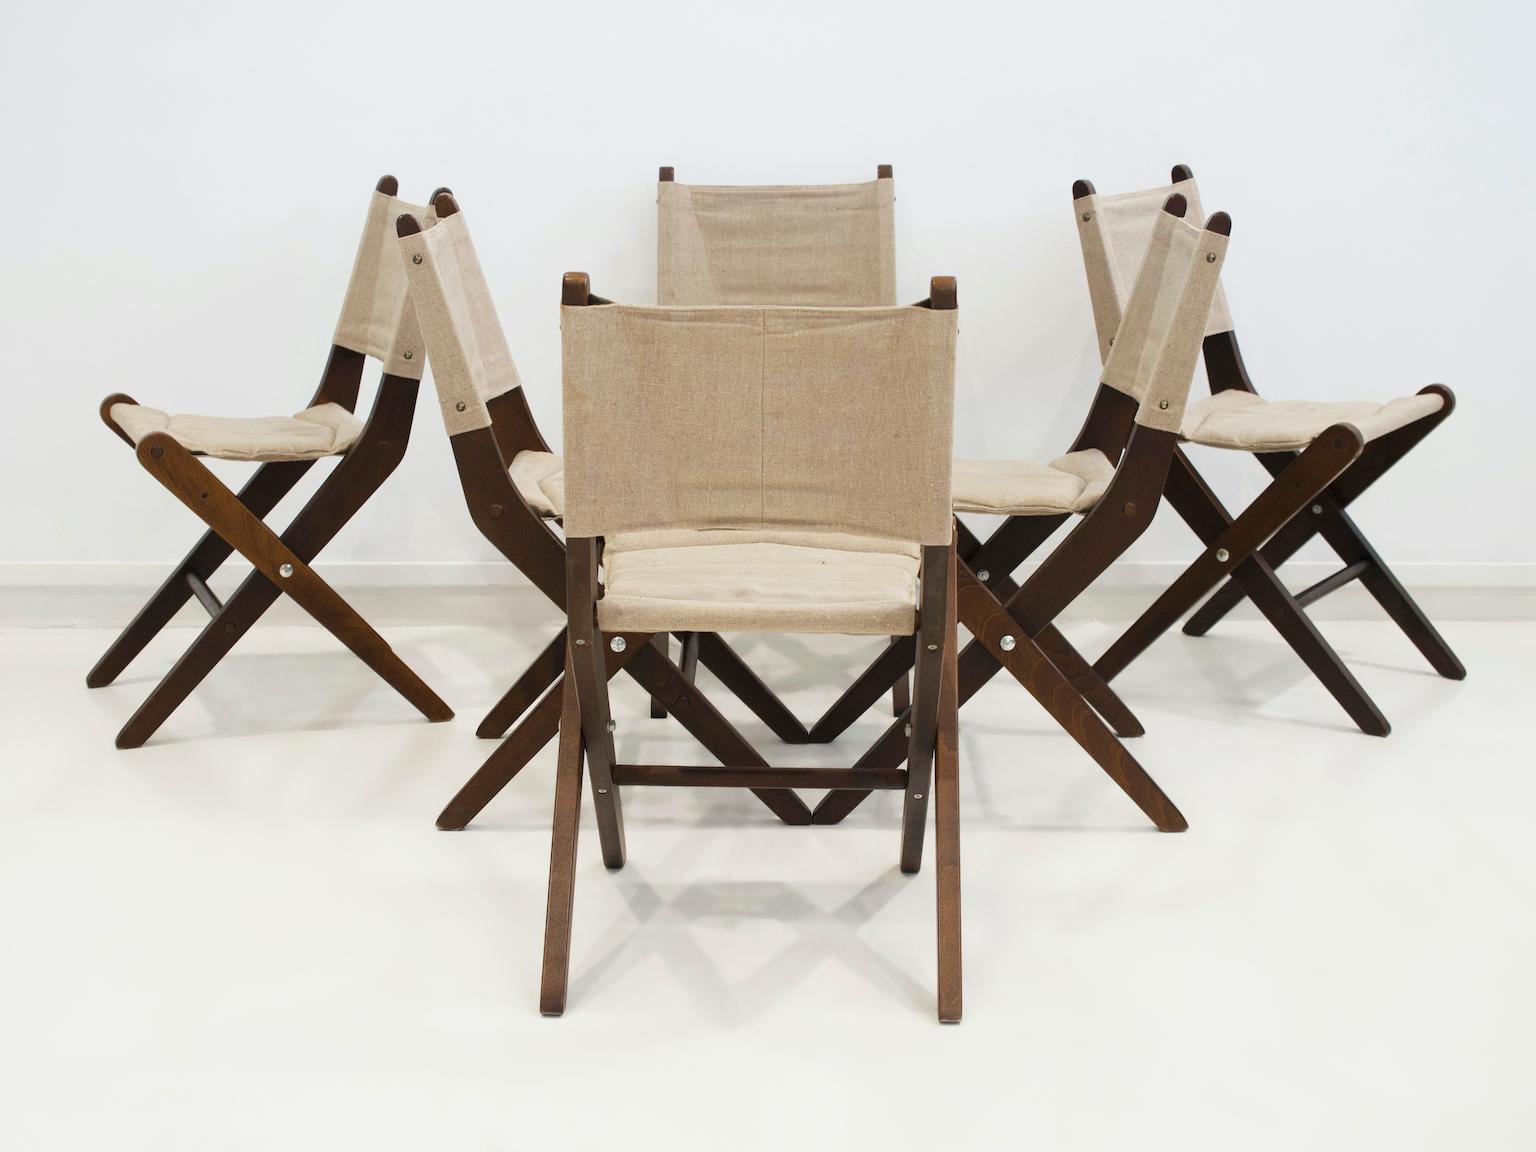 Six folding chairs of stained beech with canvas seat and backrest. Manufactured in Denmark by Sorø Møbelfabrik, model 330. Height when folded - 97 cm.